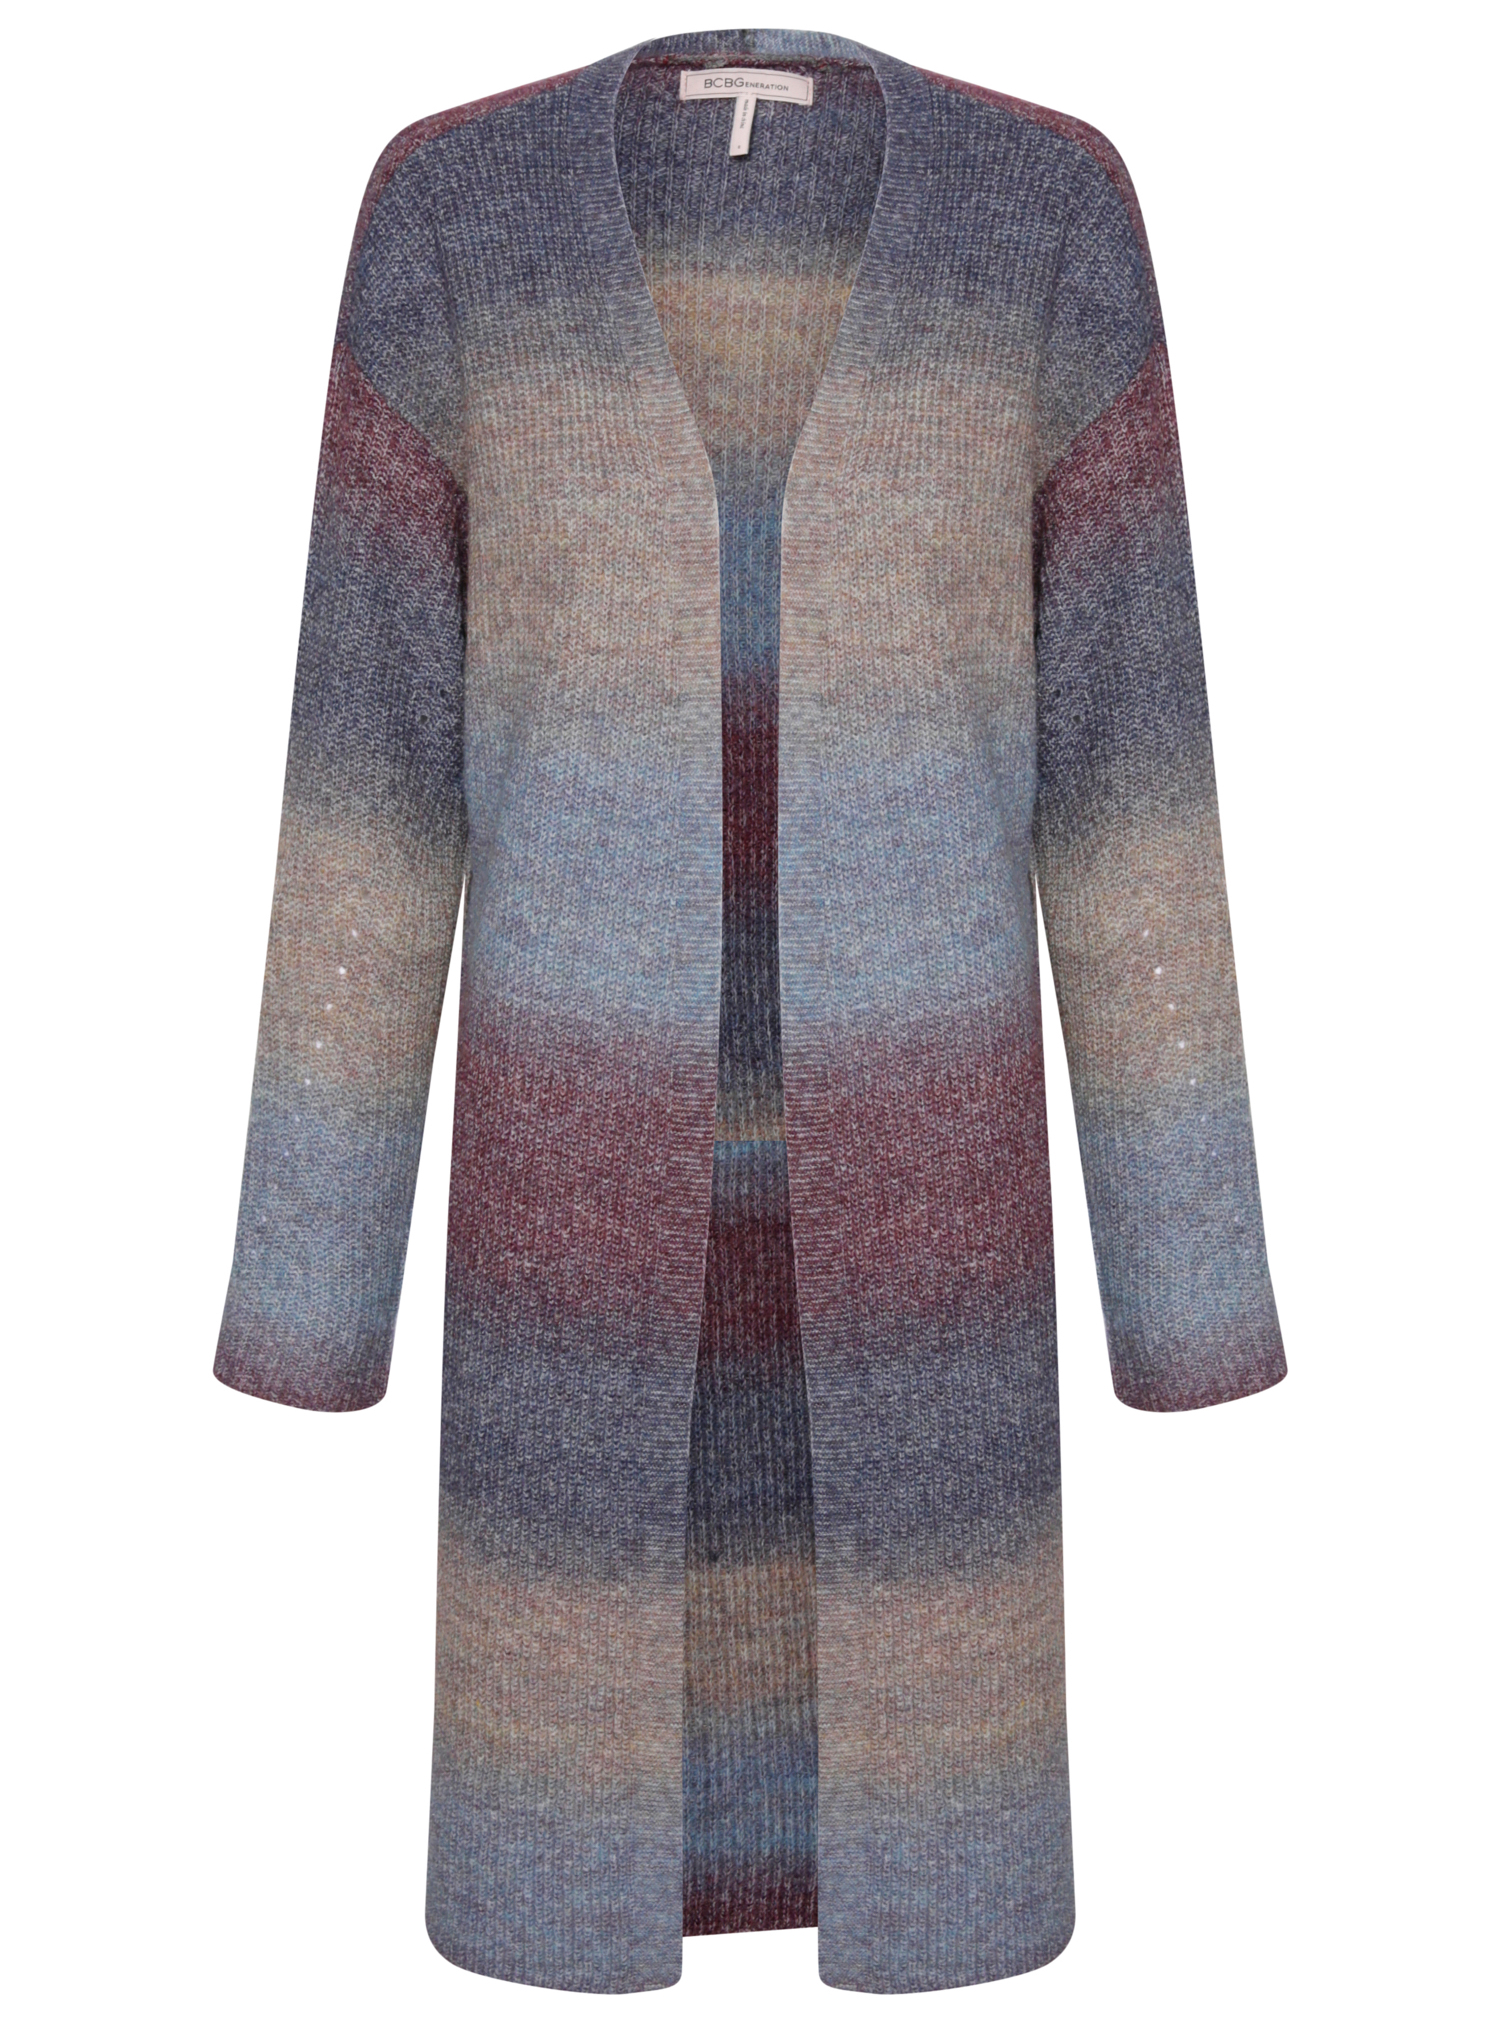 BCBGeneration Multi-Colored Open Front Cardigan